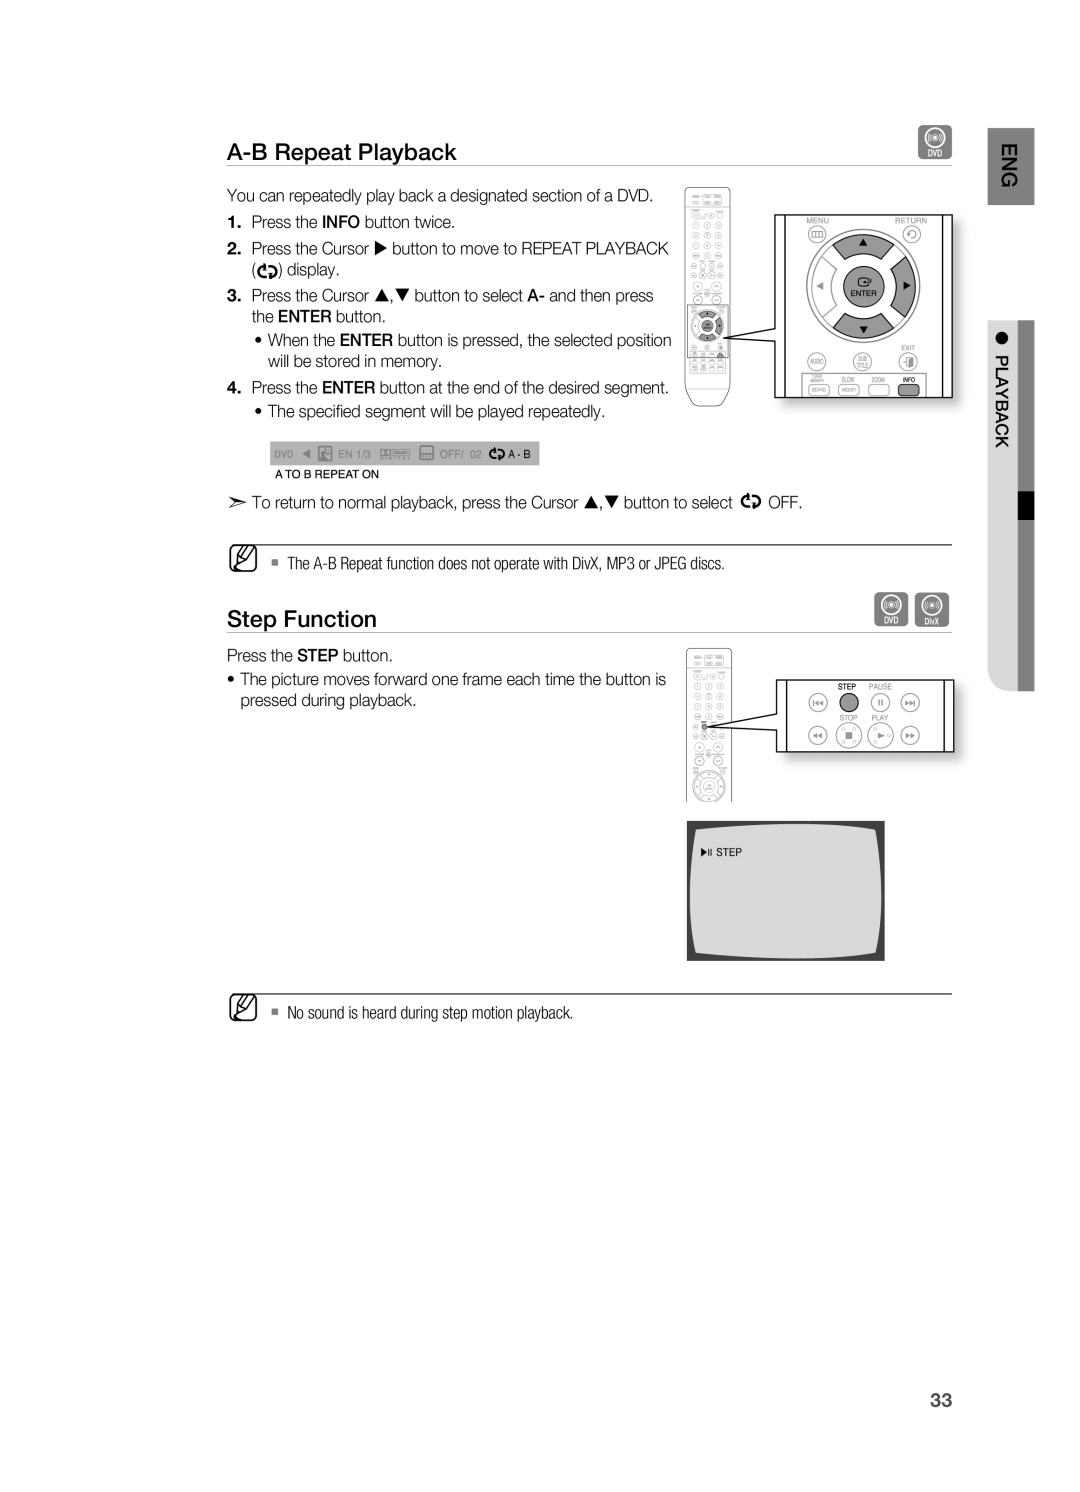 Samsung HT-X710 user manual A-Brepeat Playback, Step Function 